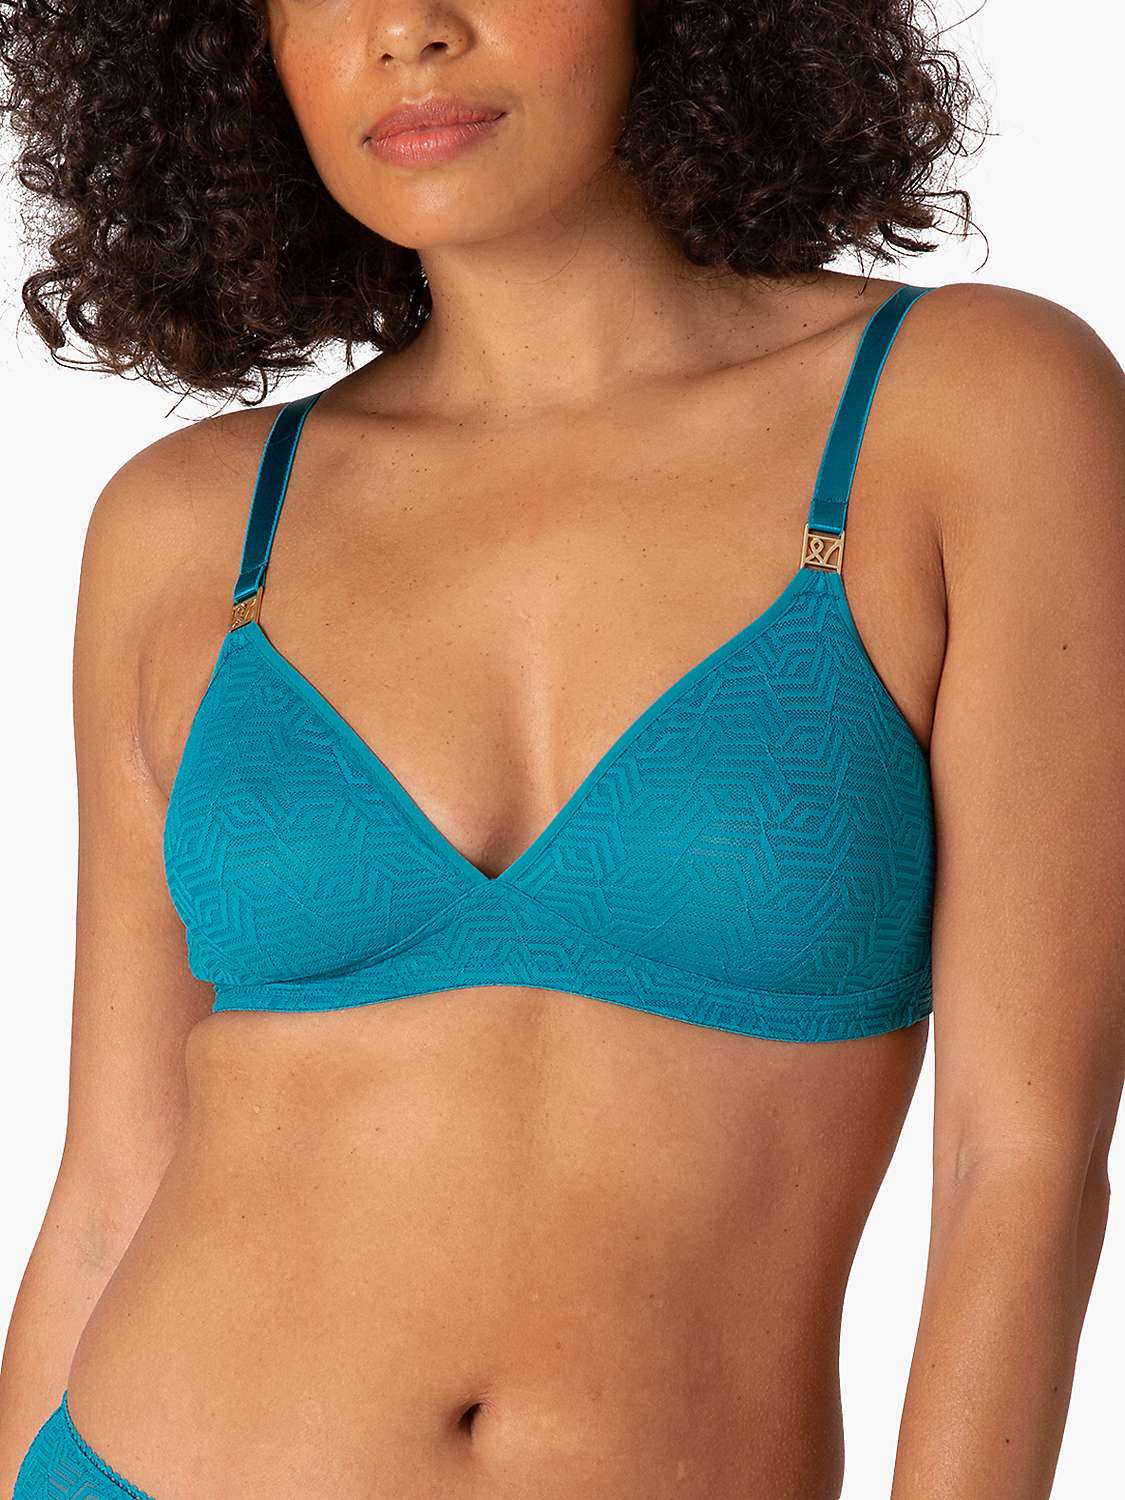 Buy Nudea Non-Wired Bralette Online at johnlewis.com